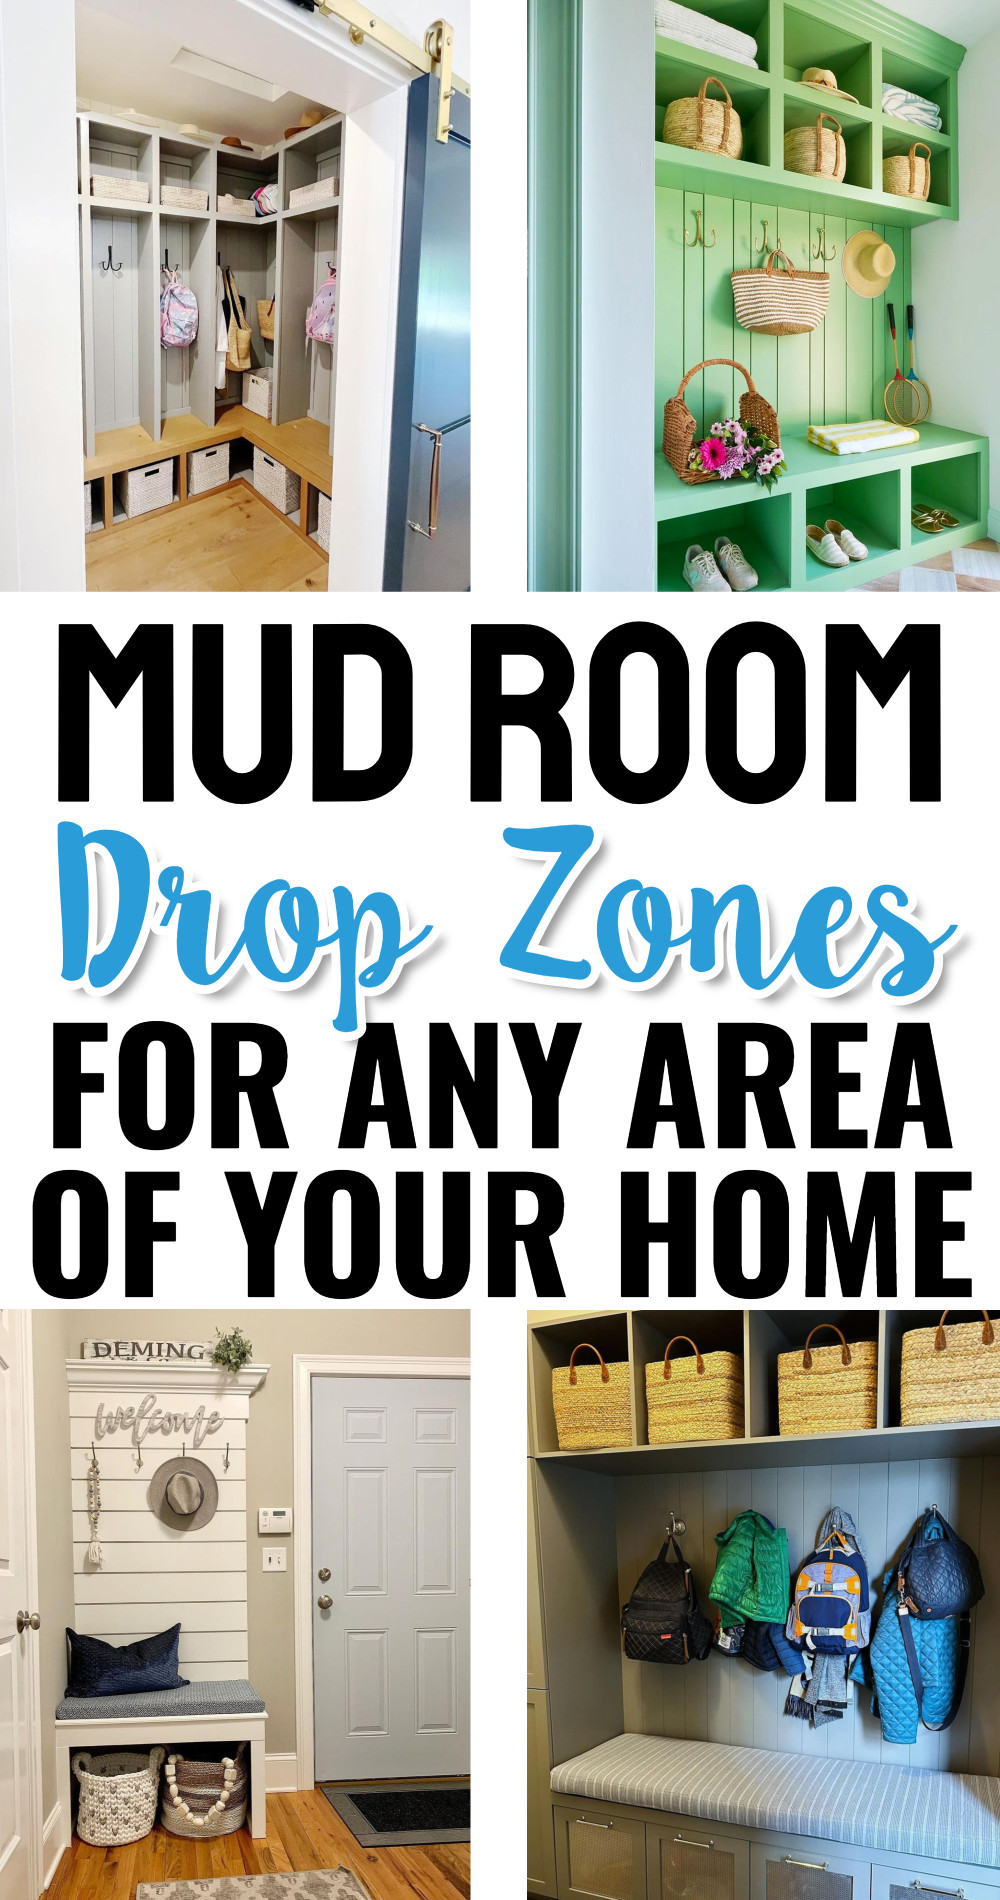 Mud Room Drop Zone Ideas For Any Area Or Wall In your Home